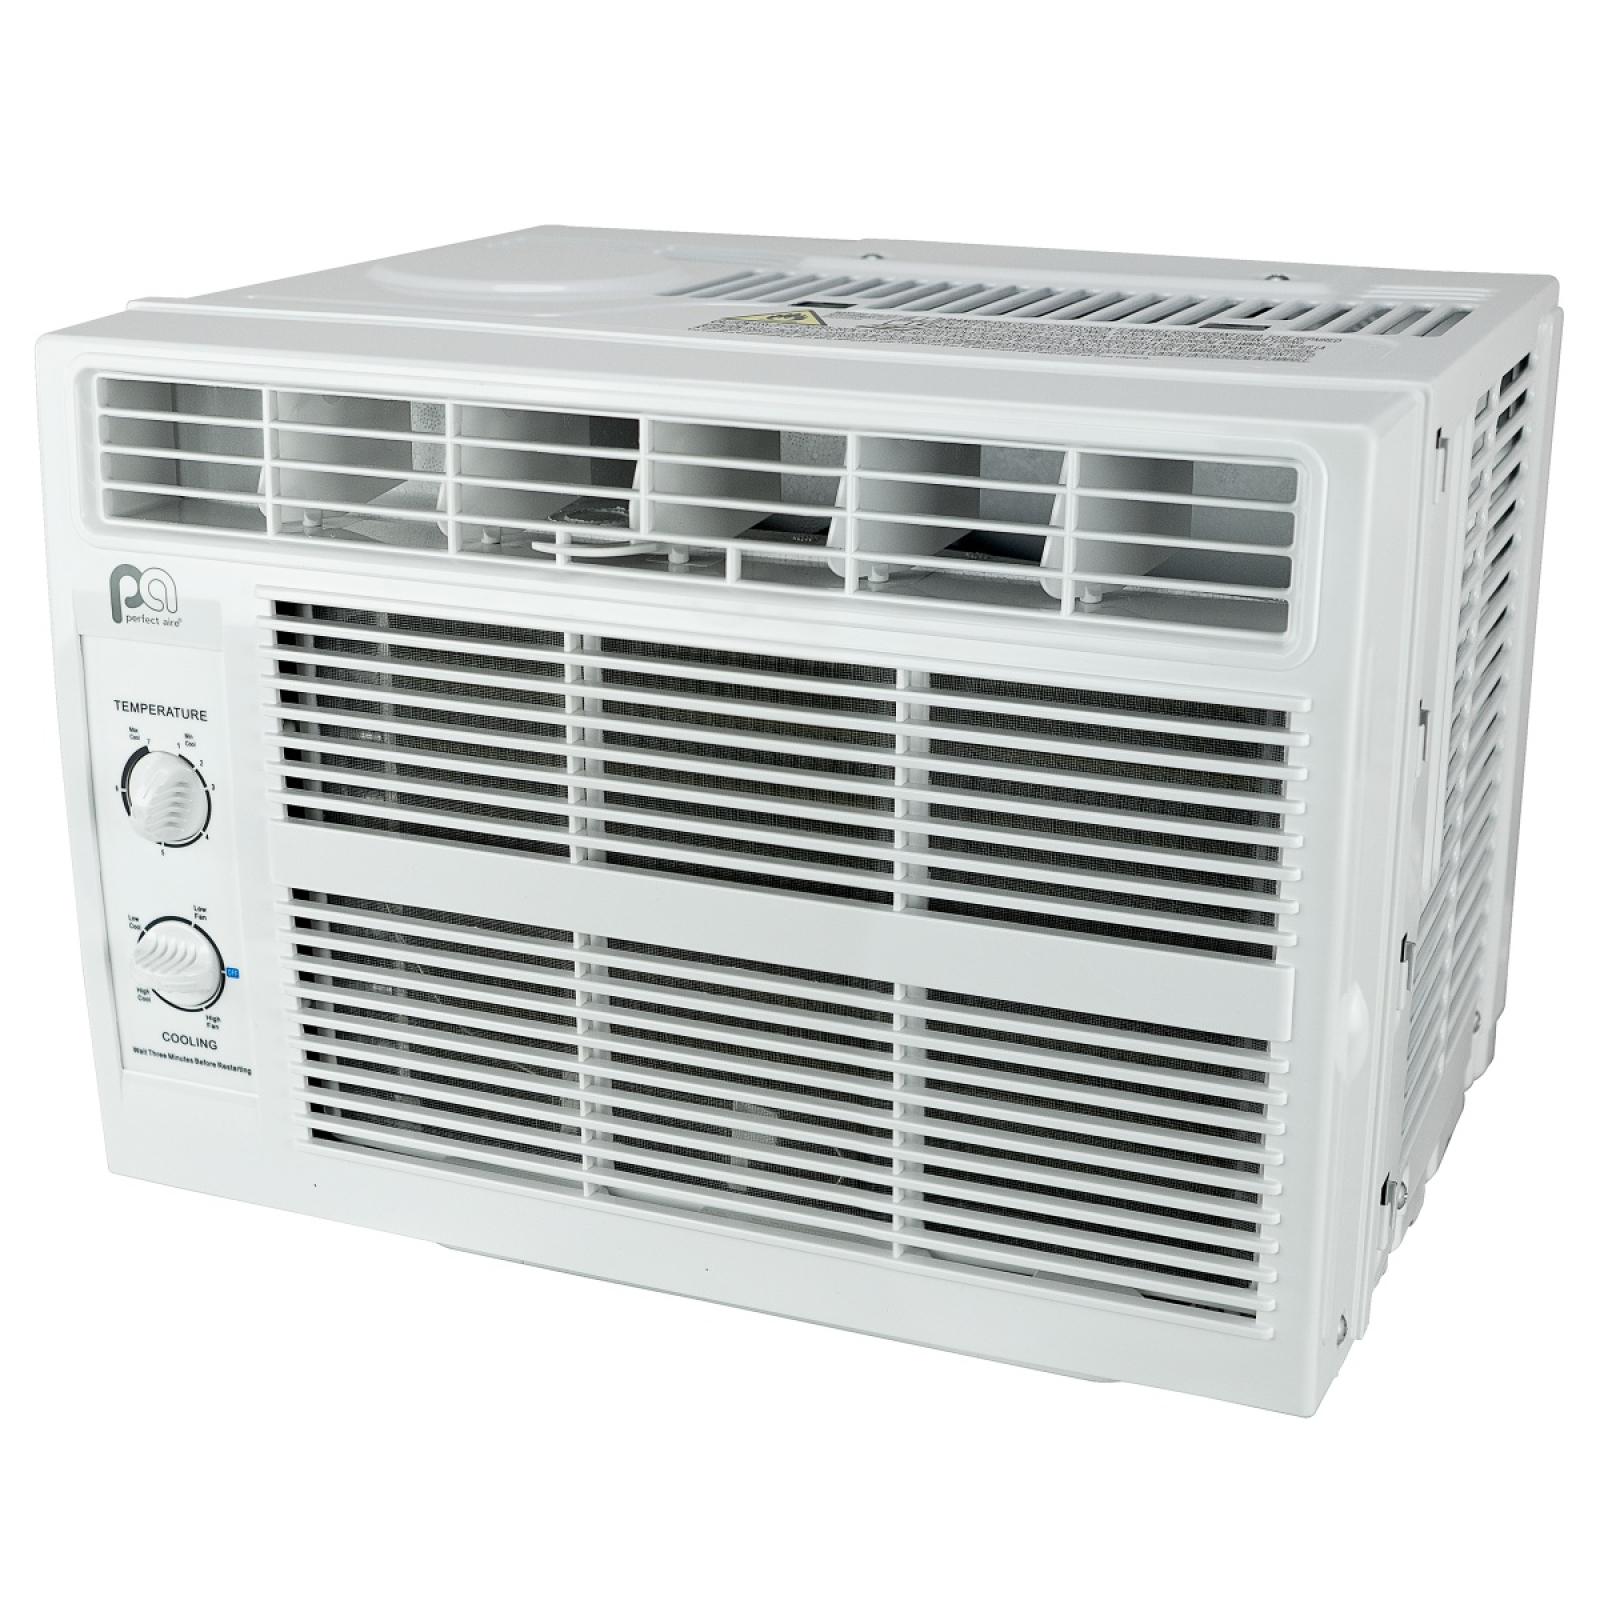 Perfect Aire 5,000 BTU Window Air Conditioner with Mechanical Controls